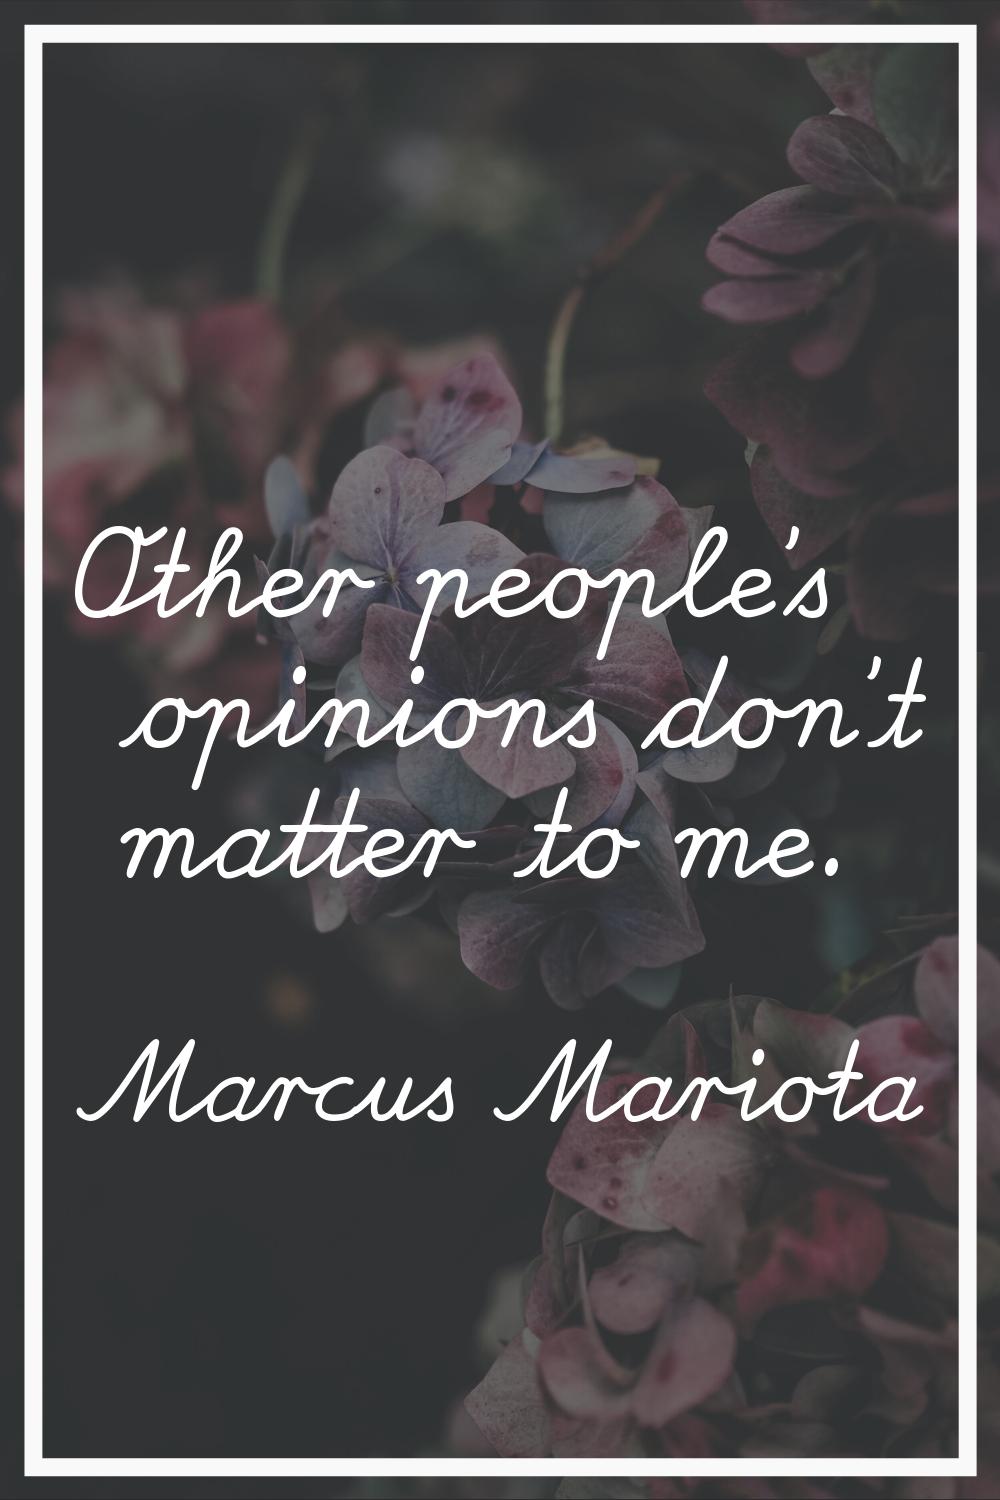 Other people's opinions don't matter to me.